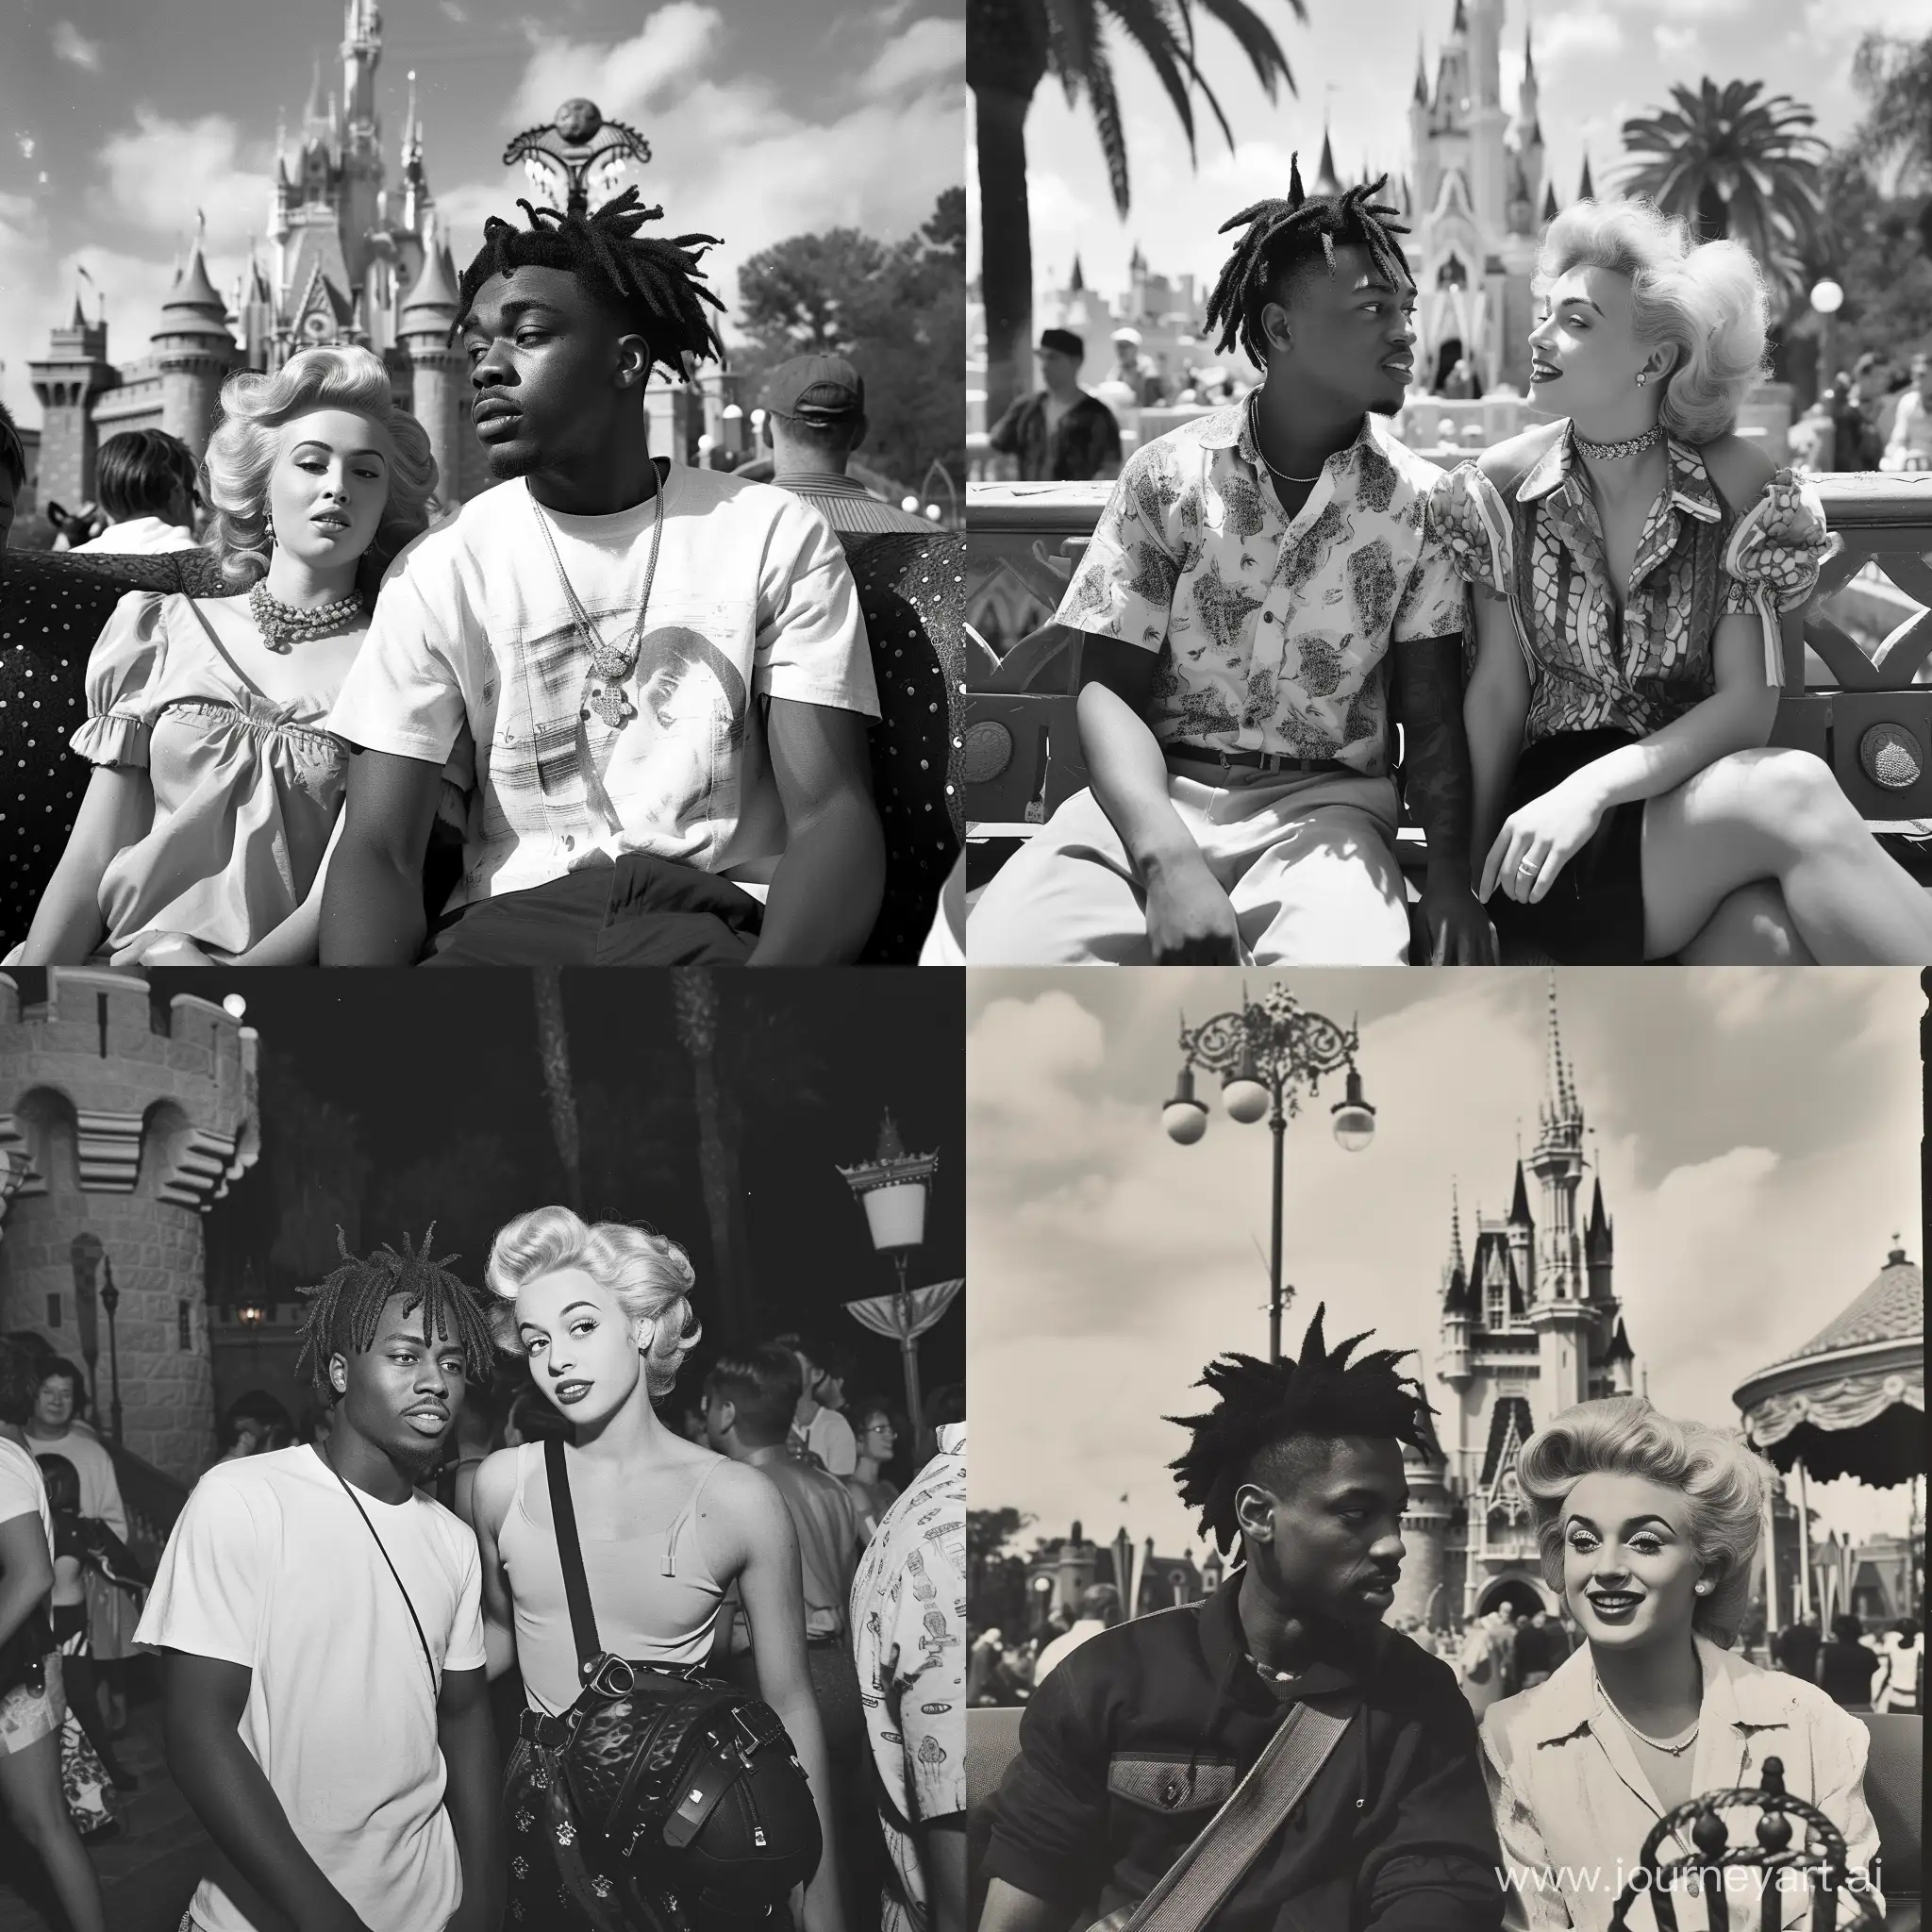 A 1950s Black and White Photograph,of Juice WRLD,With Marilyn Monroe,at Disney World.